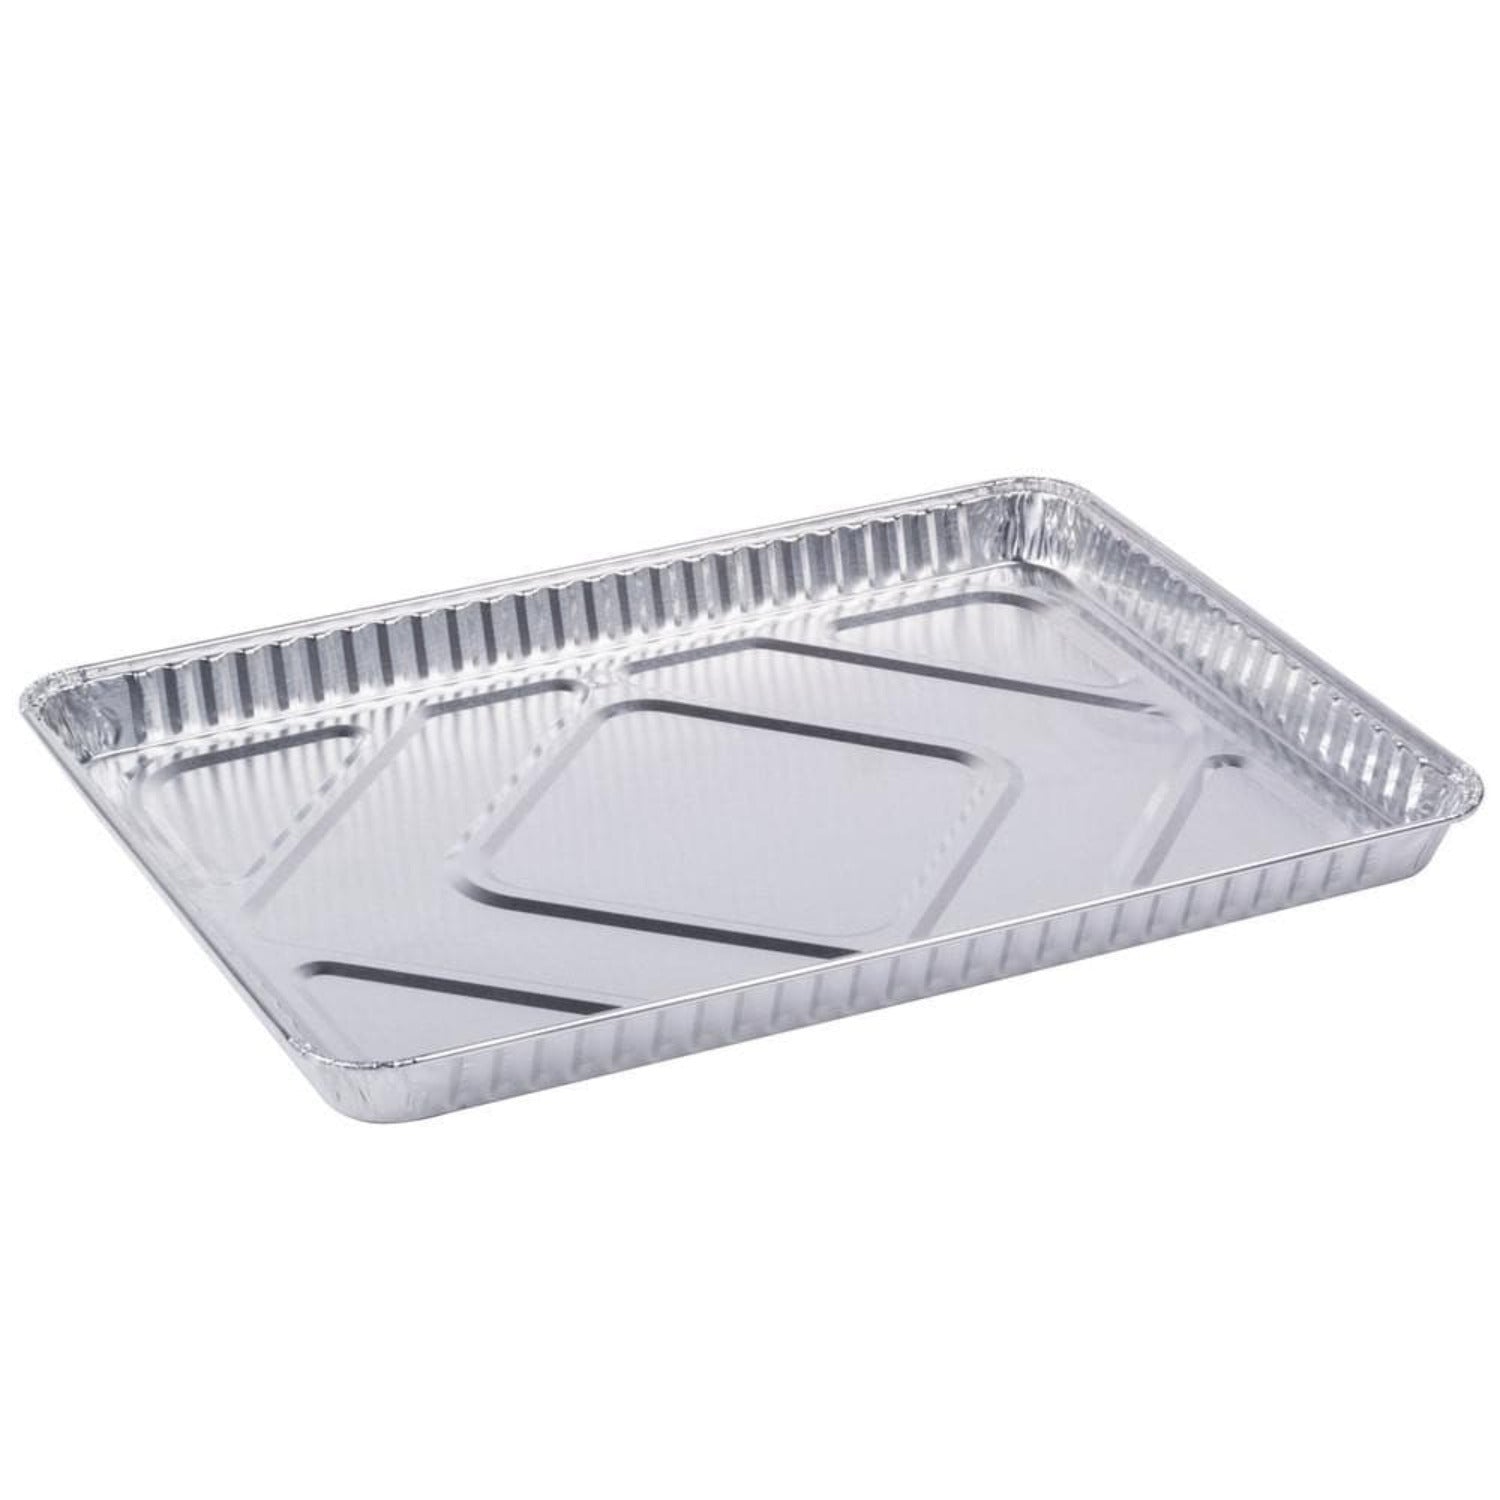 Disposable Aluminum Half Size Baking Tray Cookie Sheets 16" x 11" x 1.25" Disposable Nicole Collection   